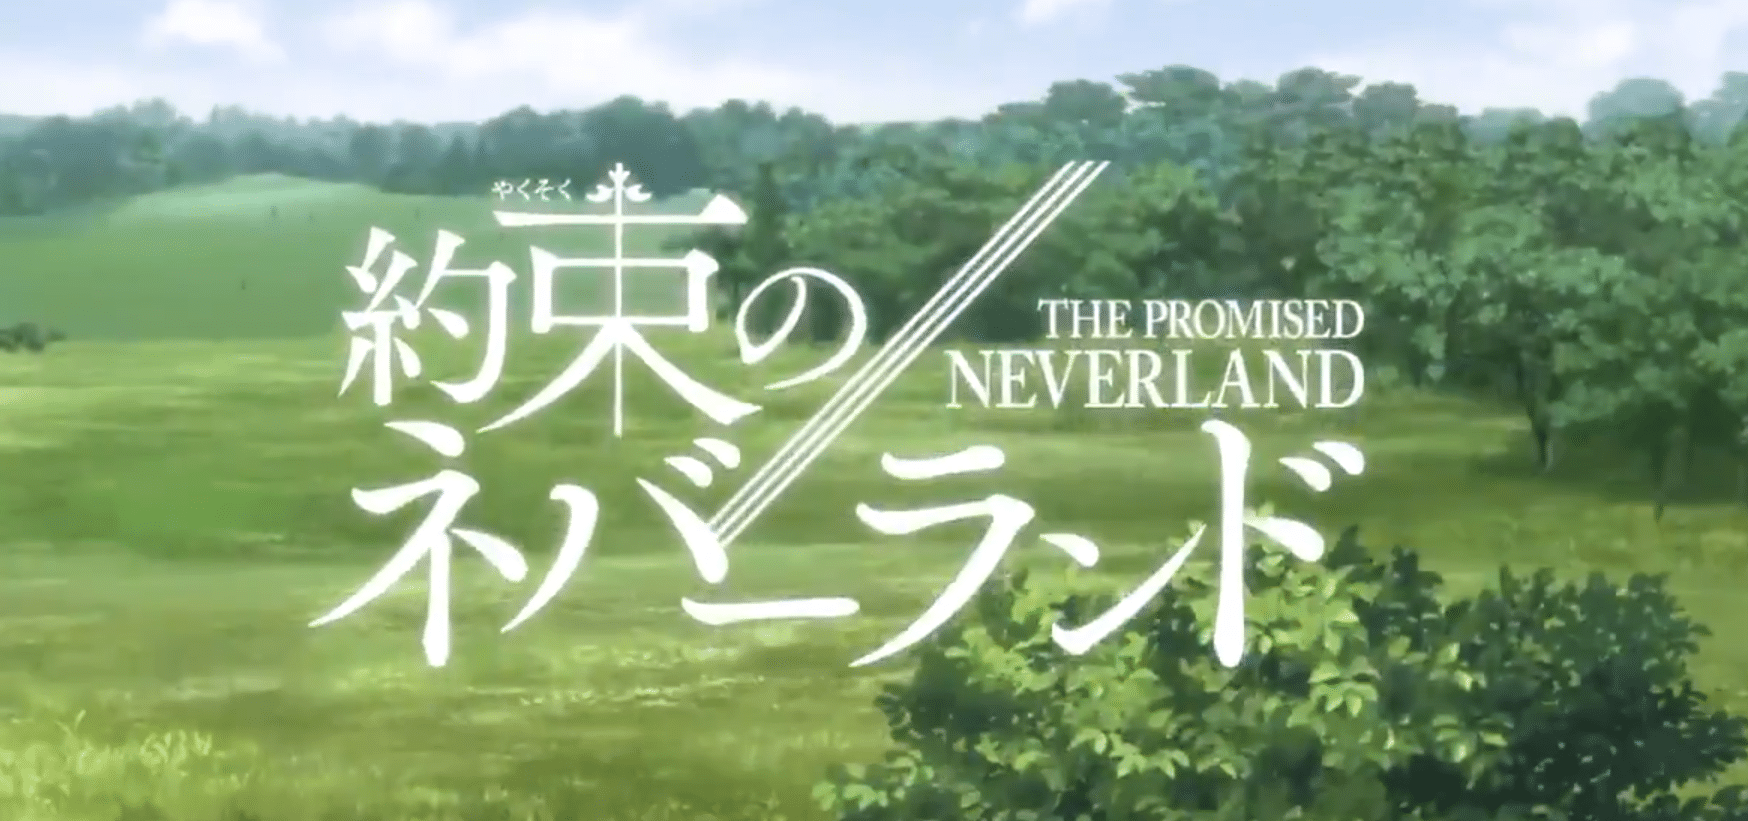 Screen del Teaser di The Promised Land